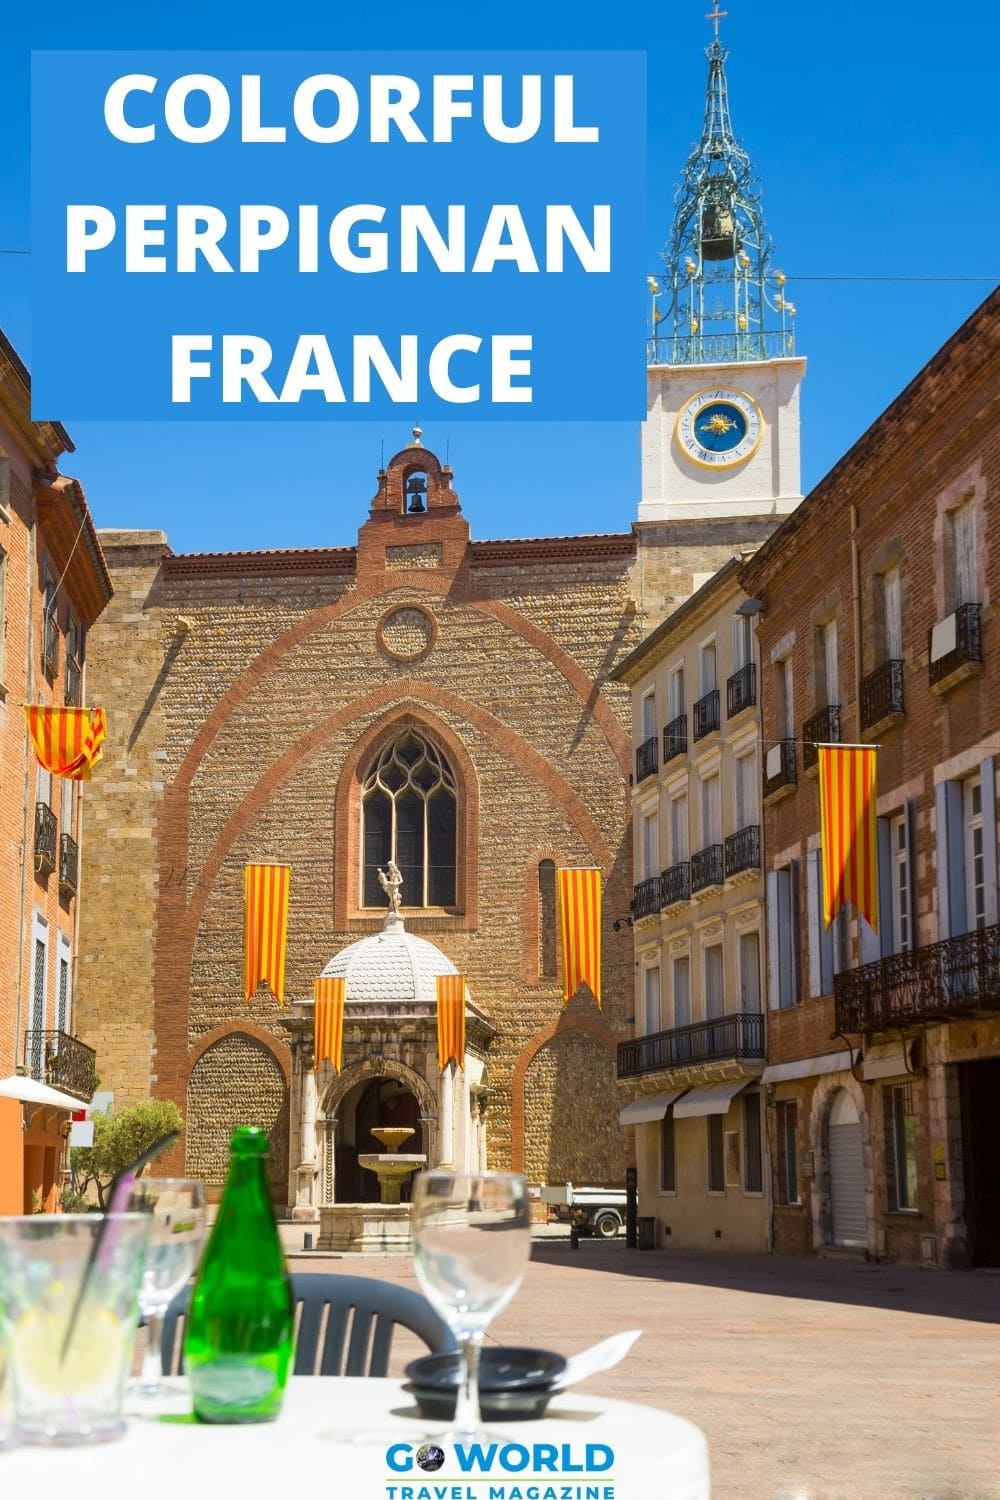 Never heard of Perpignan, France? This first-hand tale of the lively and colorful, southern French city will have you making plans to visit. #France #southernfrance